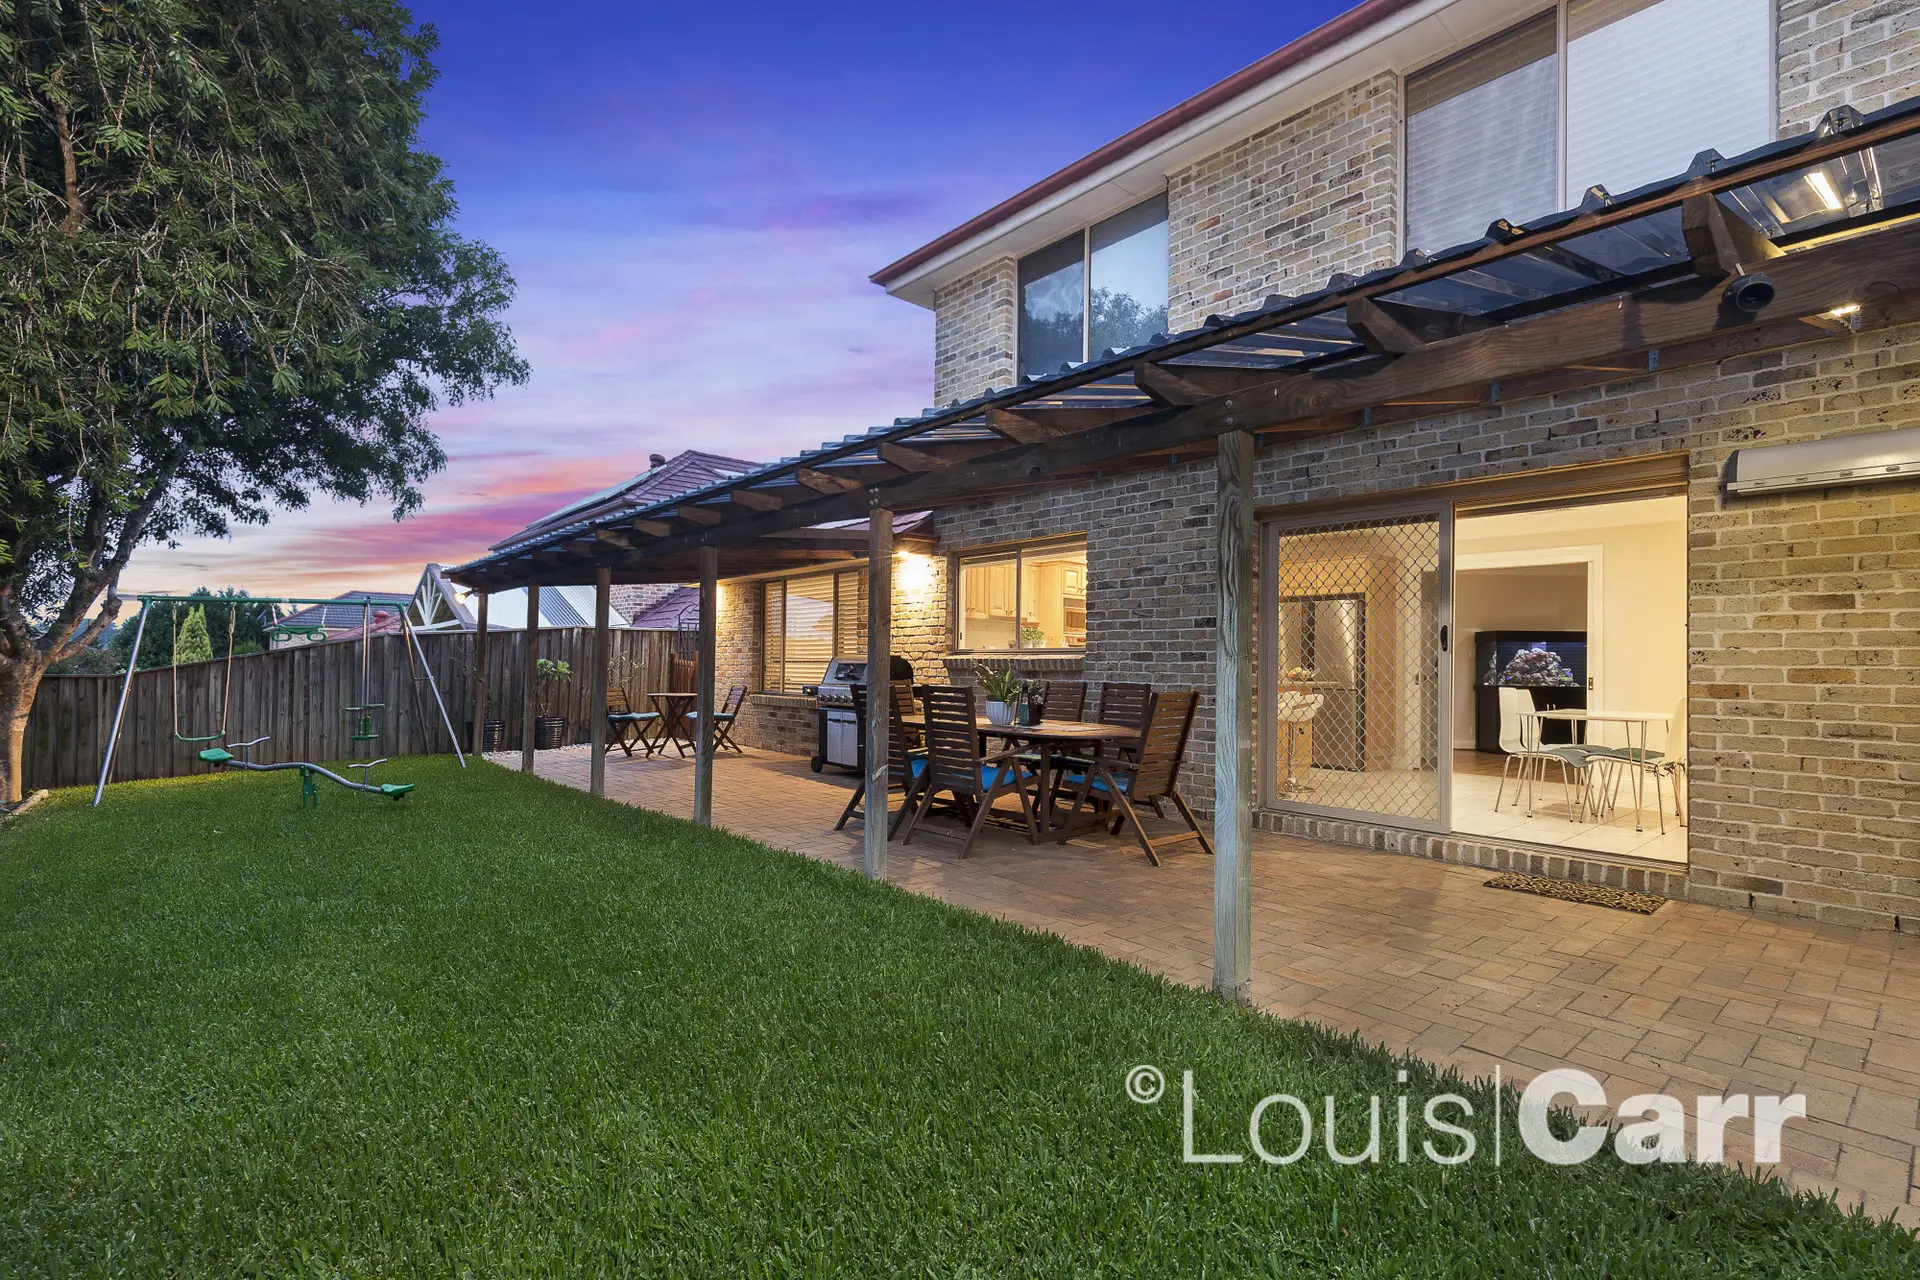 Photo #2: 8 Tellicherry Circuit, Beaumont Hills - Sold by Louis Carr Real Estate